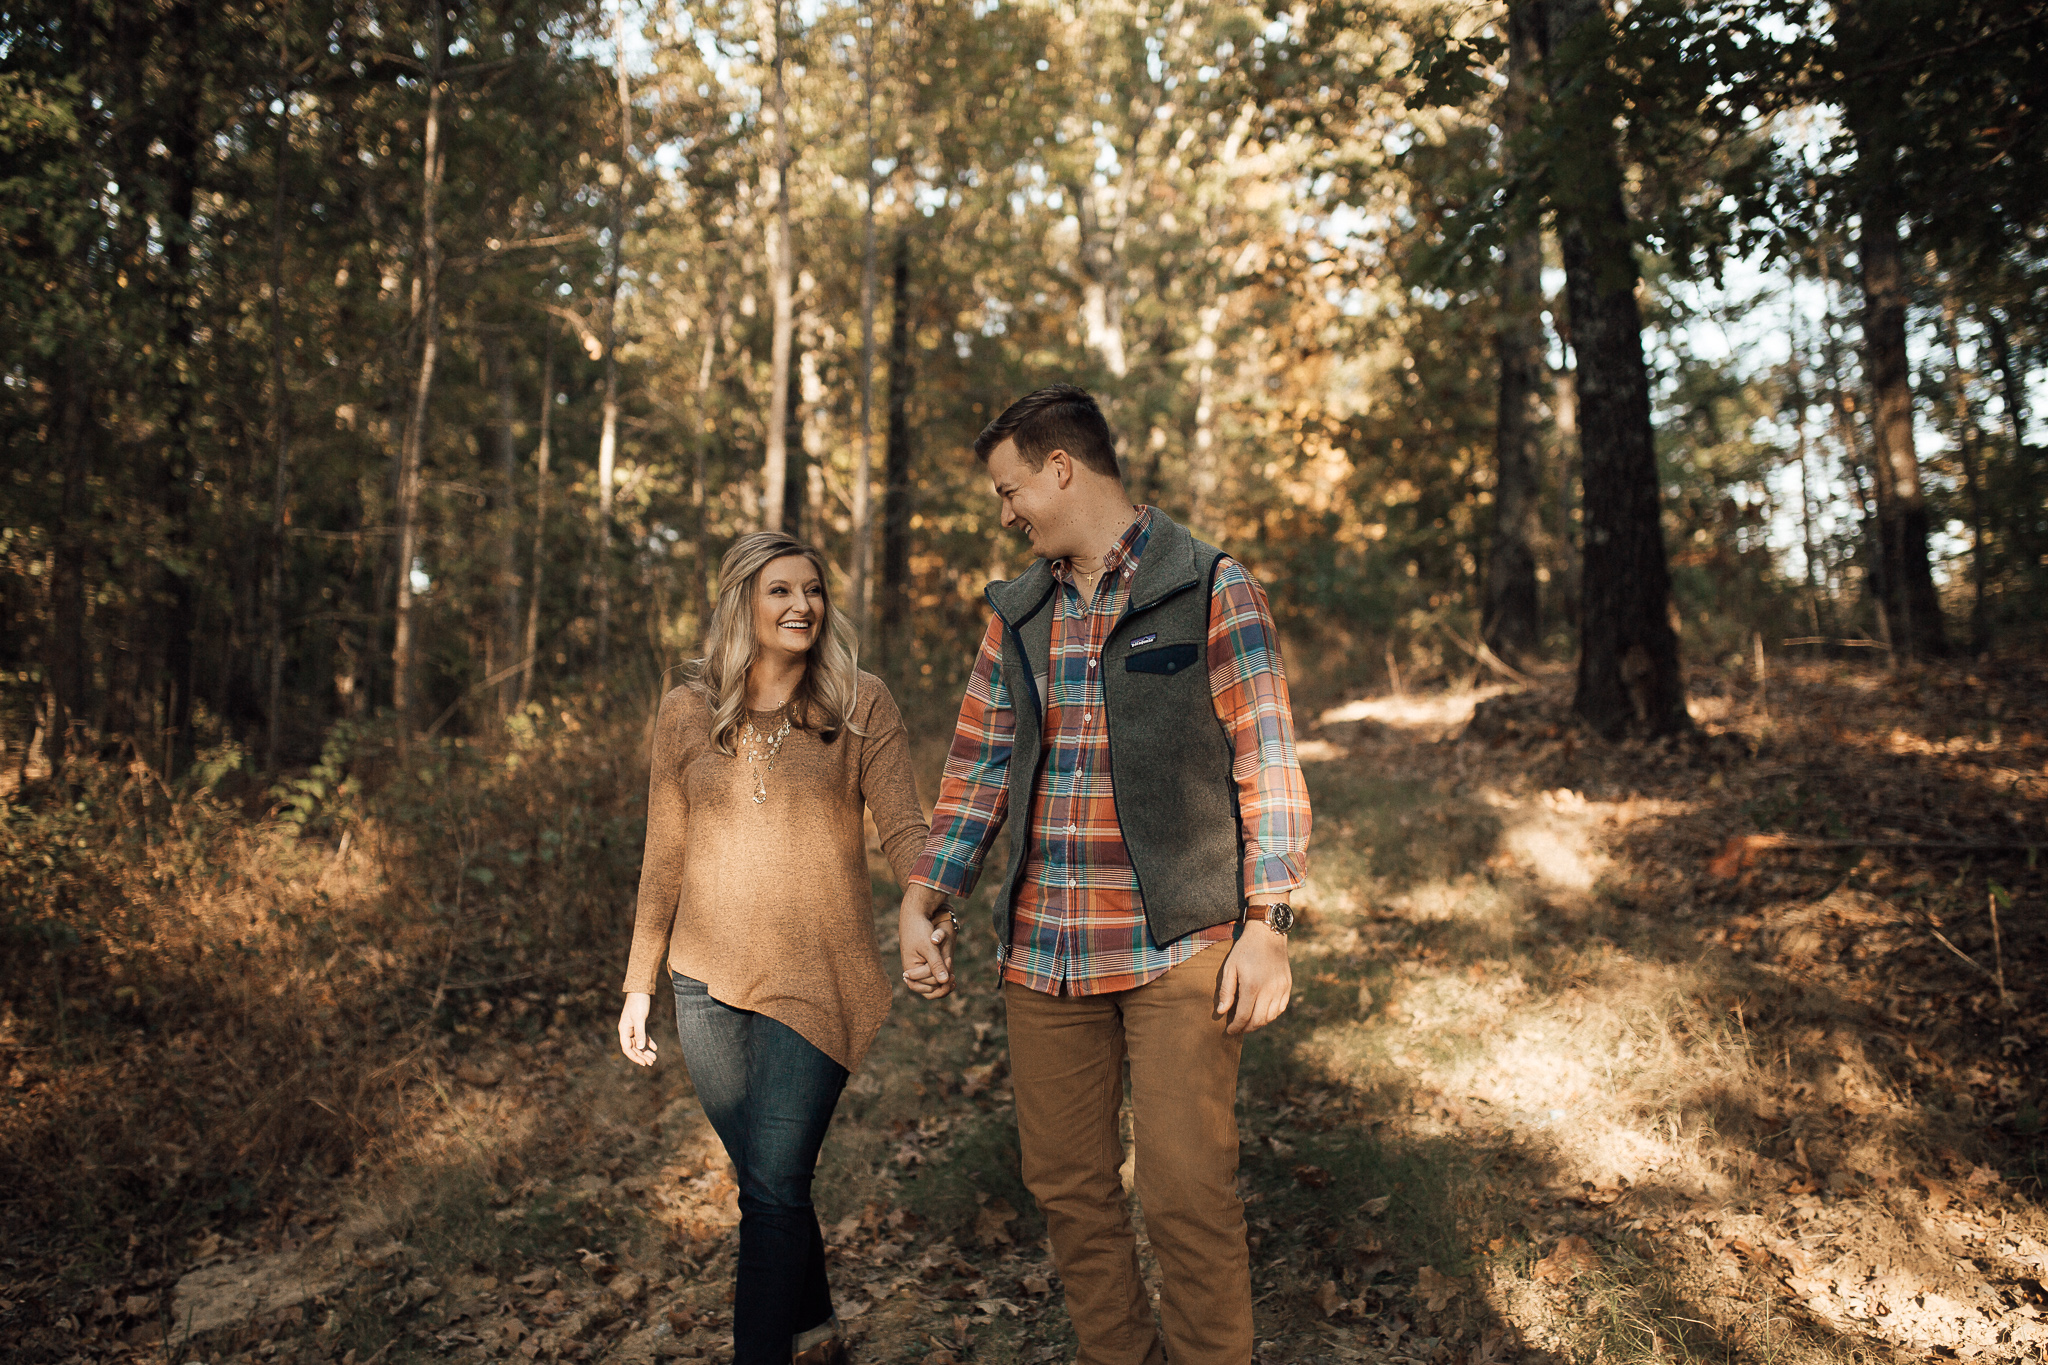 cassie-cook-photography-memphis-wedding-photographer-engagement-pictures-alexis-ryan-fall-pictures-hernando-ms-7.jpg